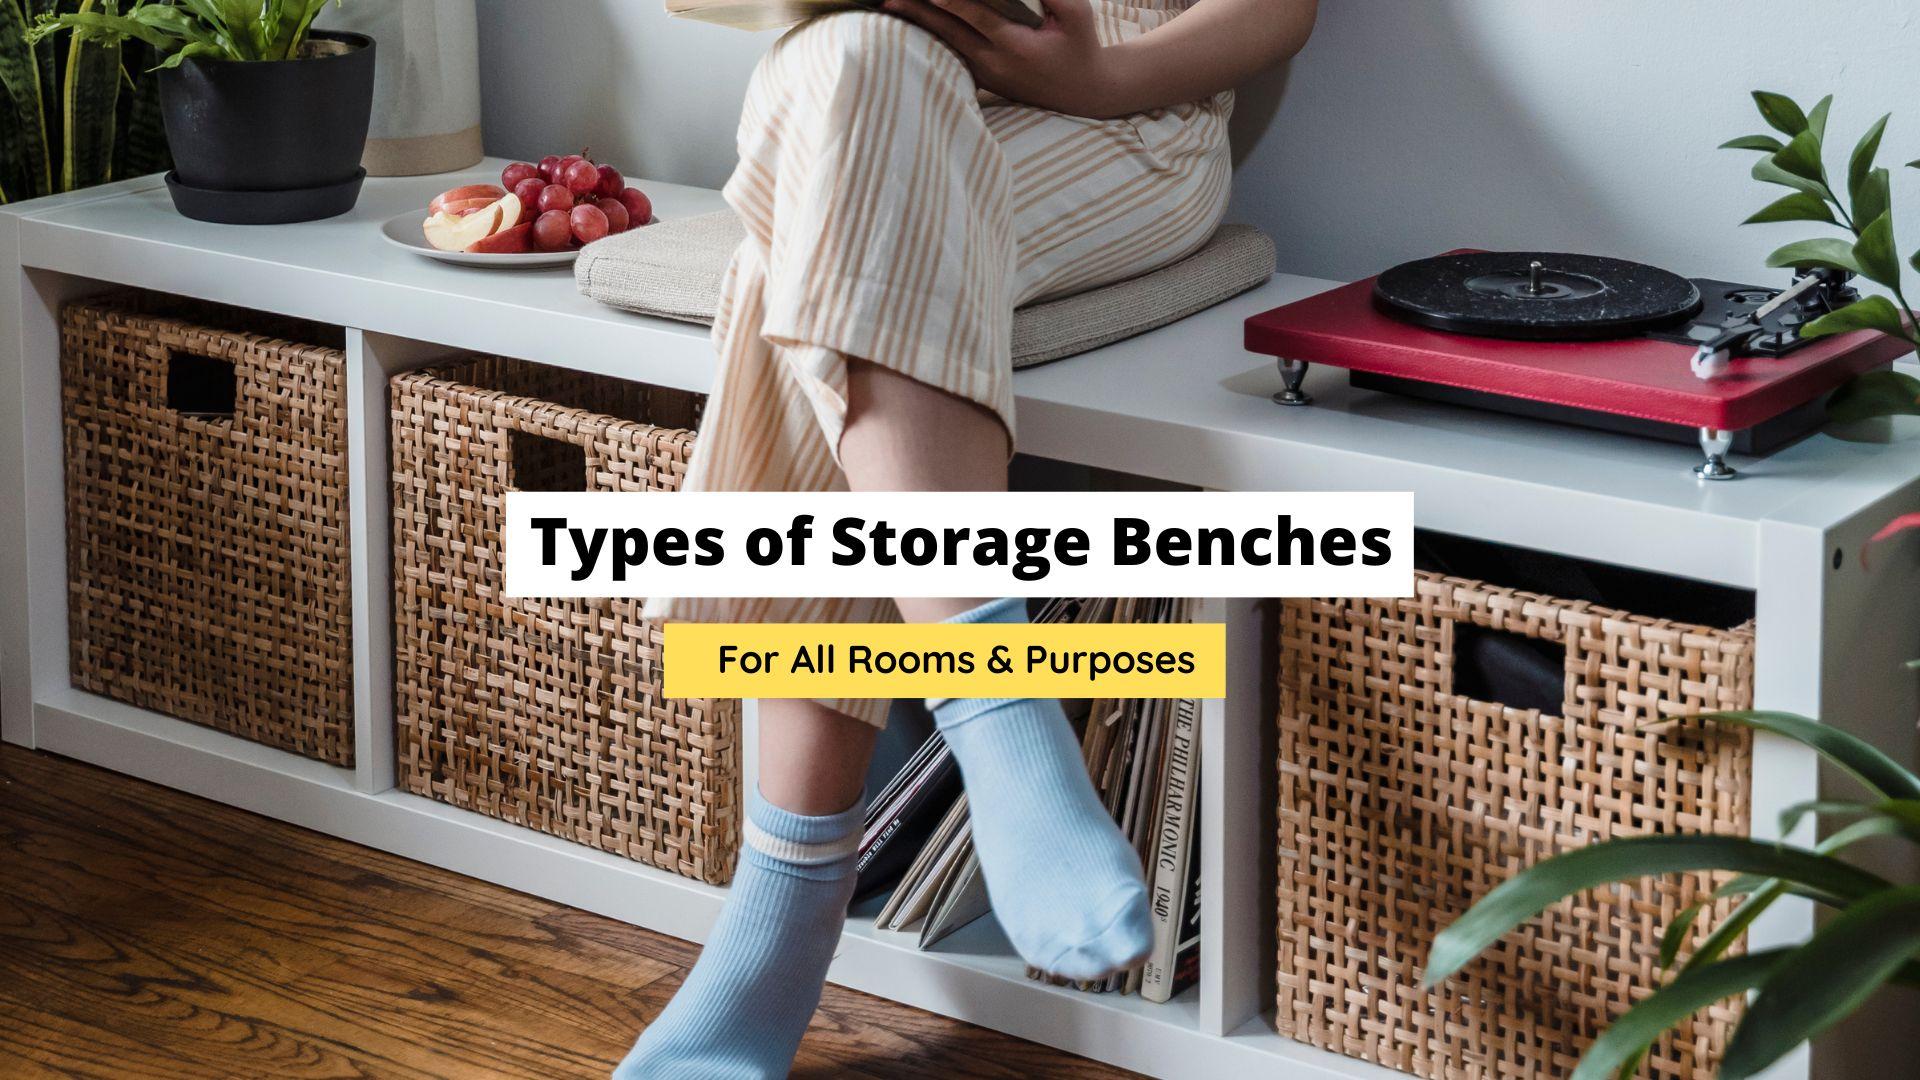 Types of Storage Benches